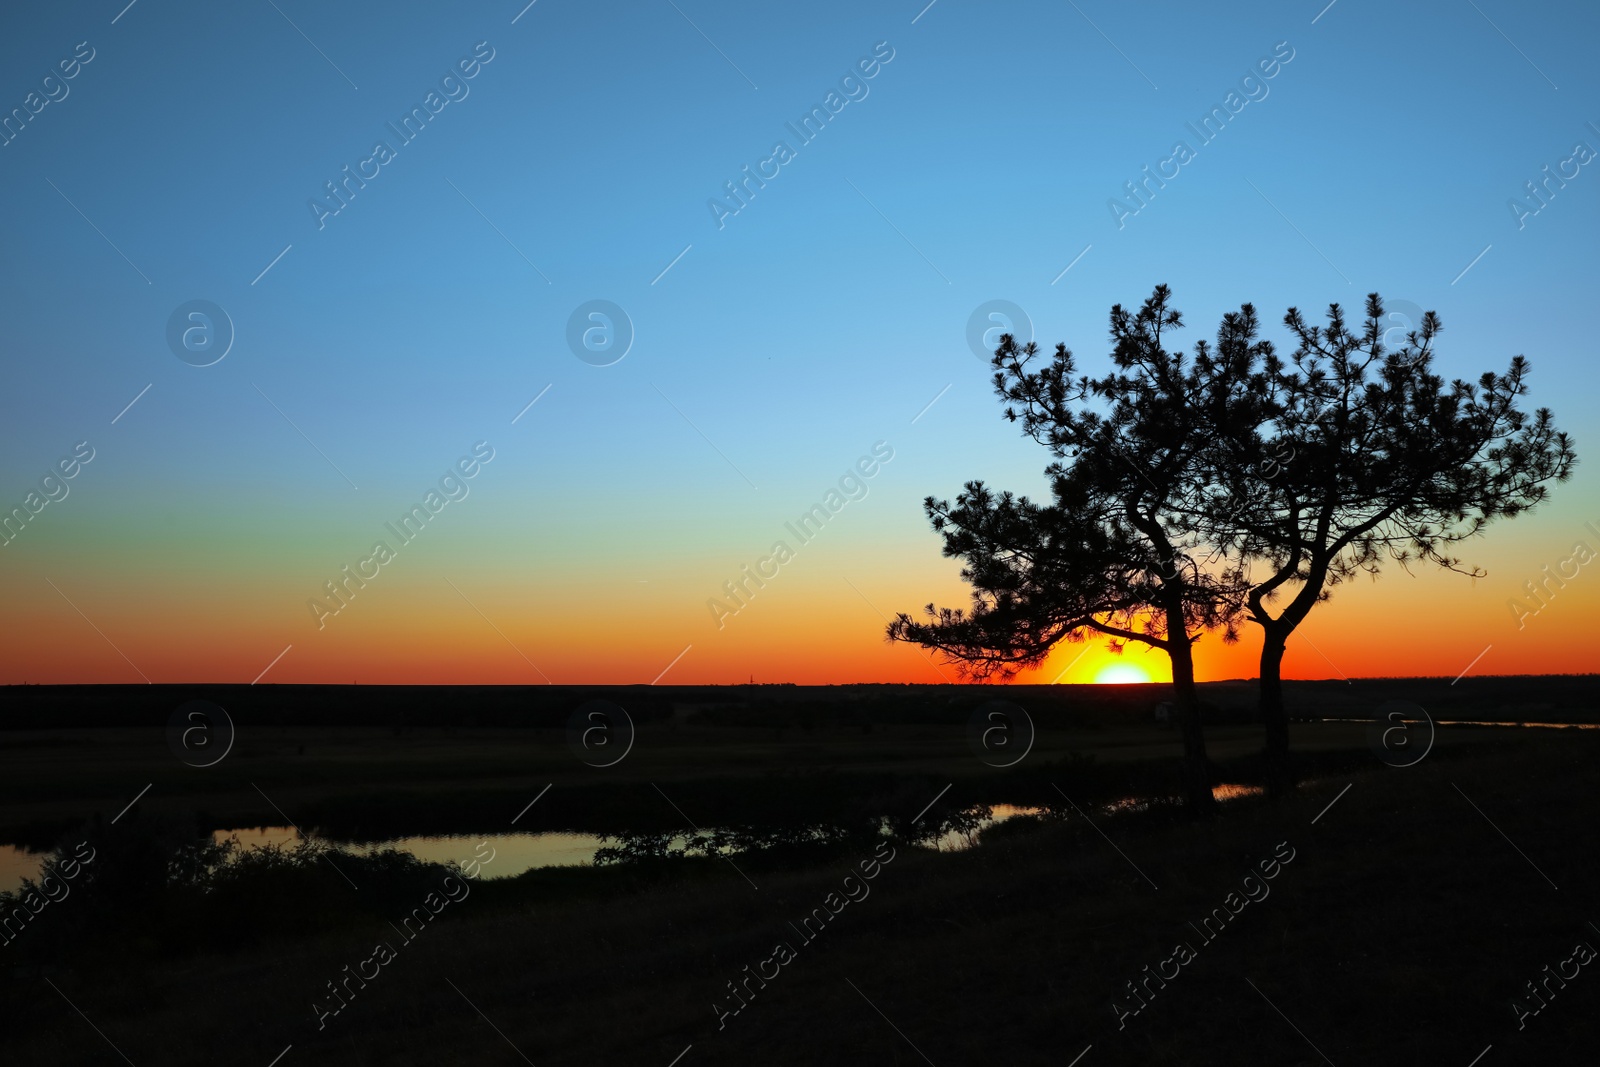 Photo of Picturesque view of tree near river at sunset